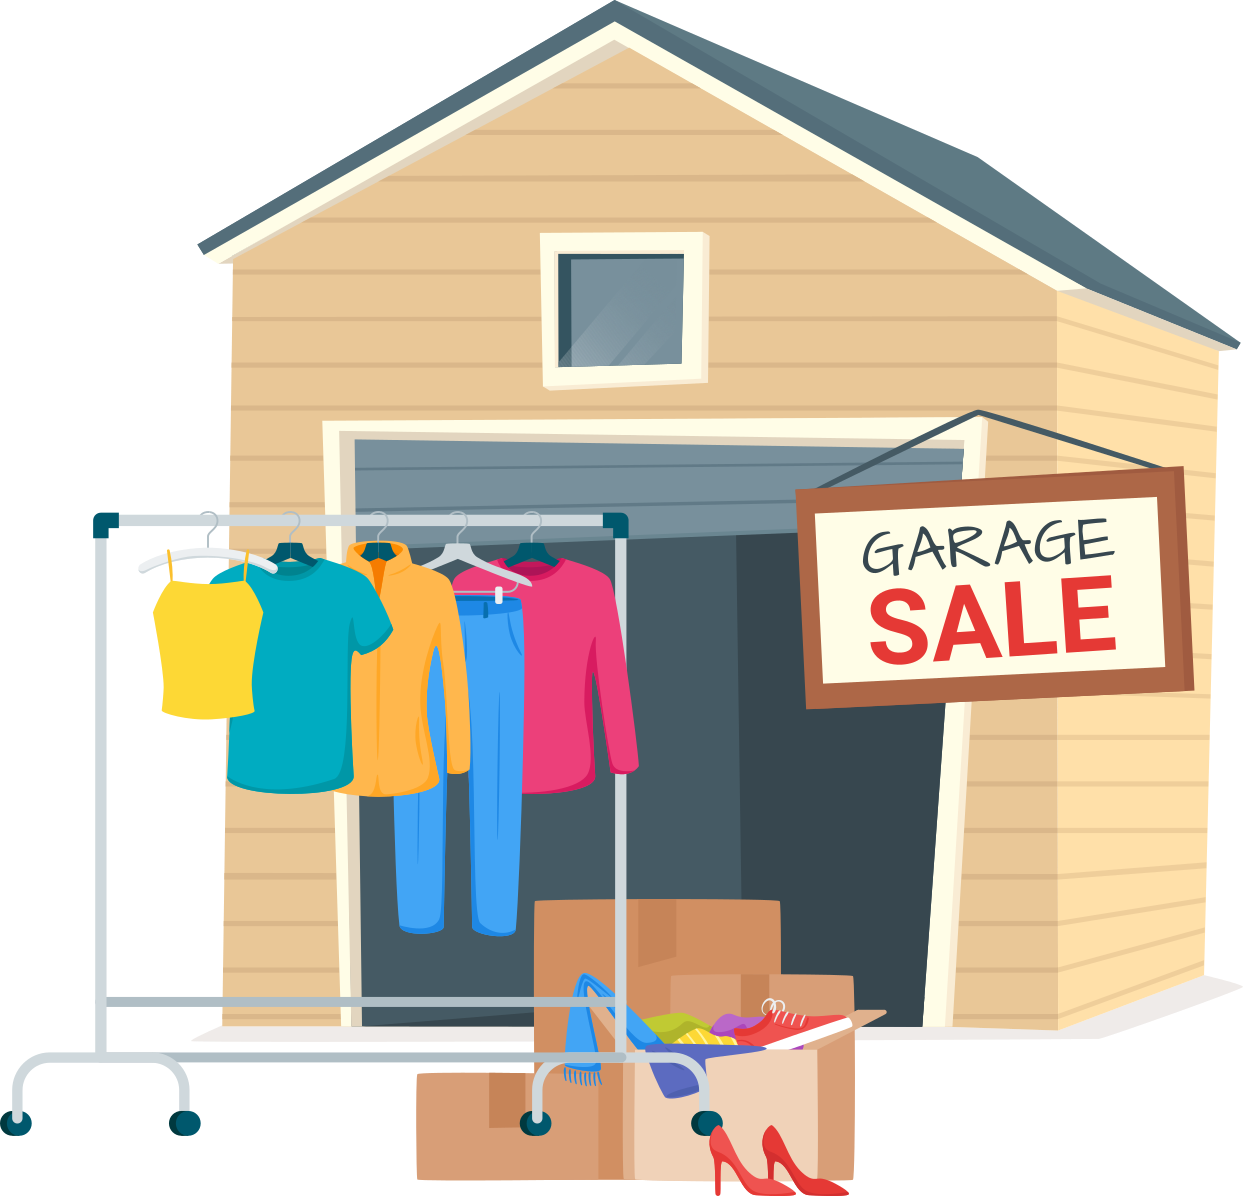 Garage Sale with Clothes & Sign